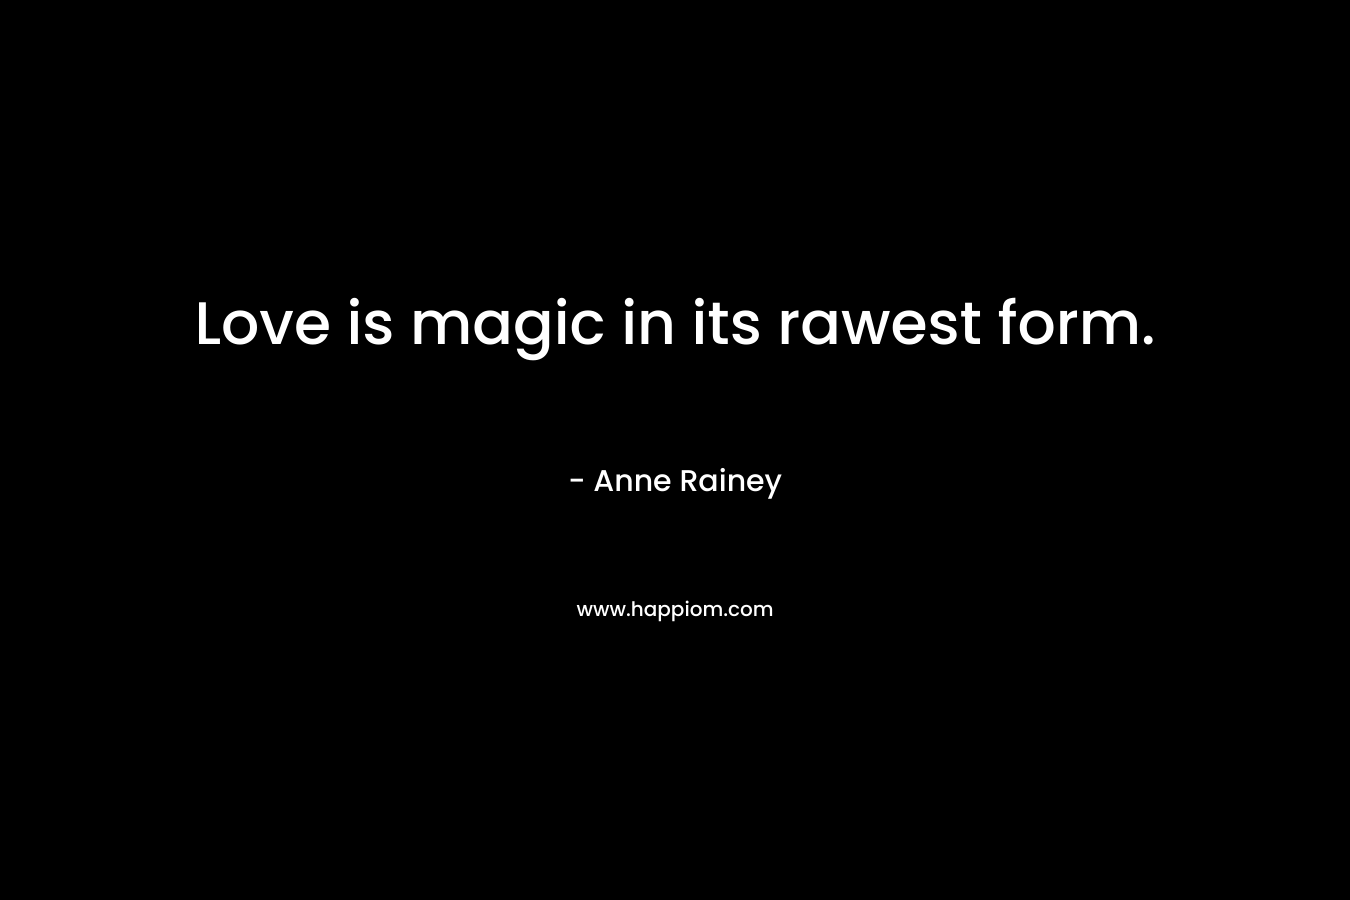 Love is magic in its rawest form. – Anne Rainey